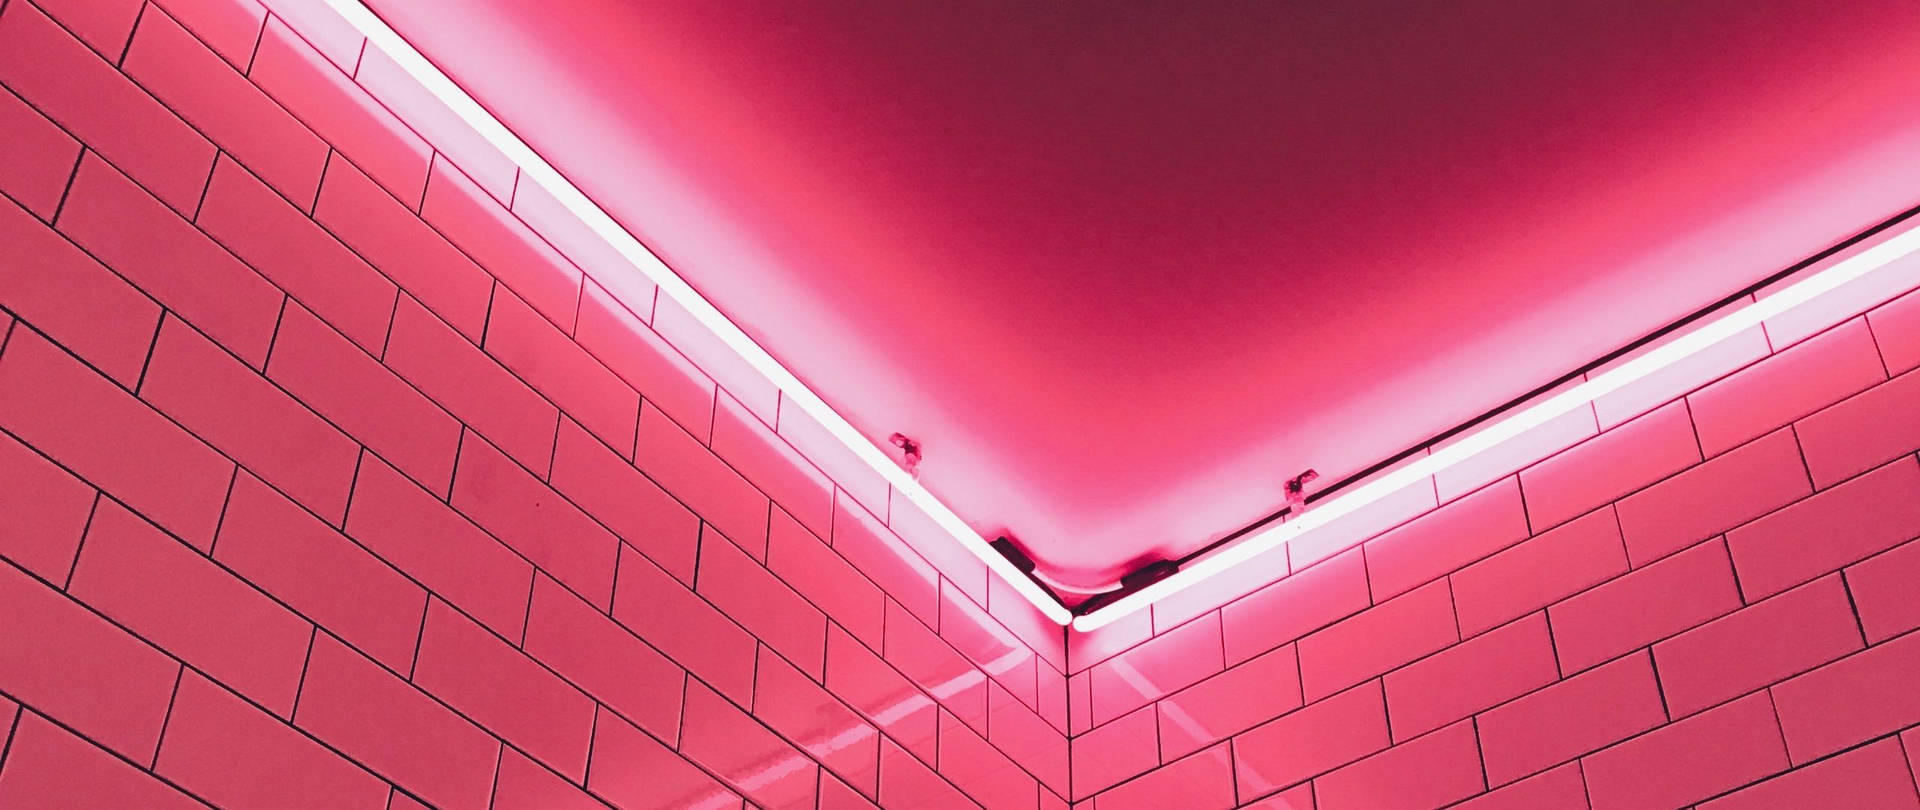 Cool Aesthetic Pink Tile